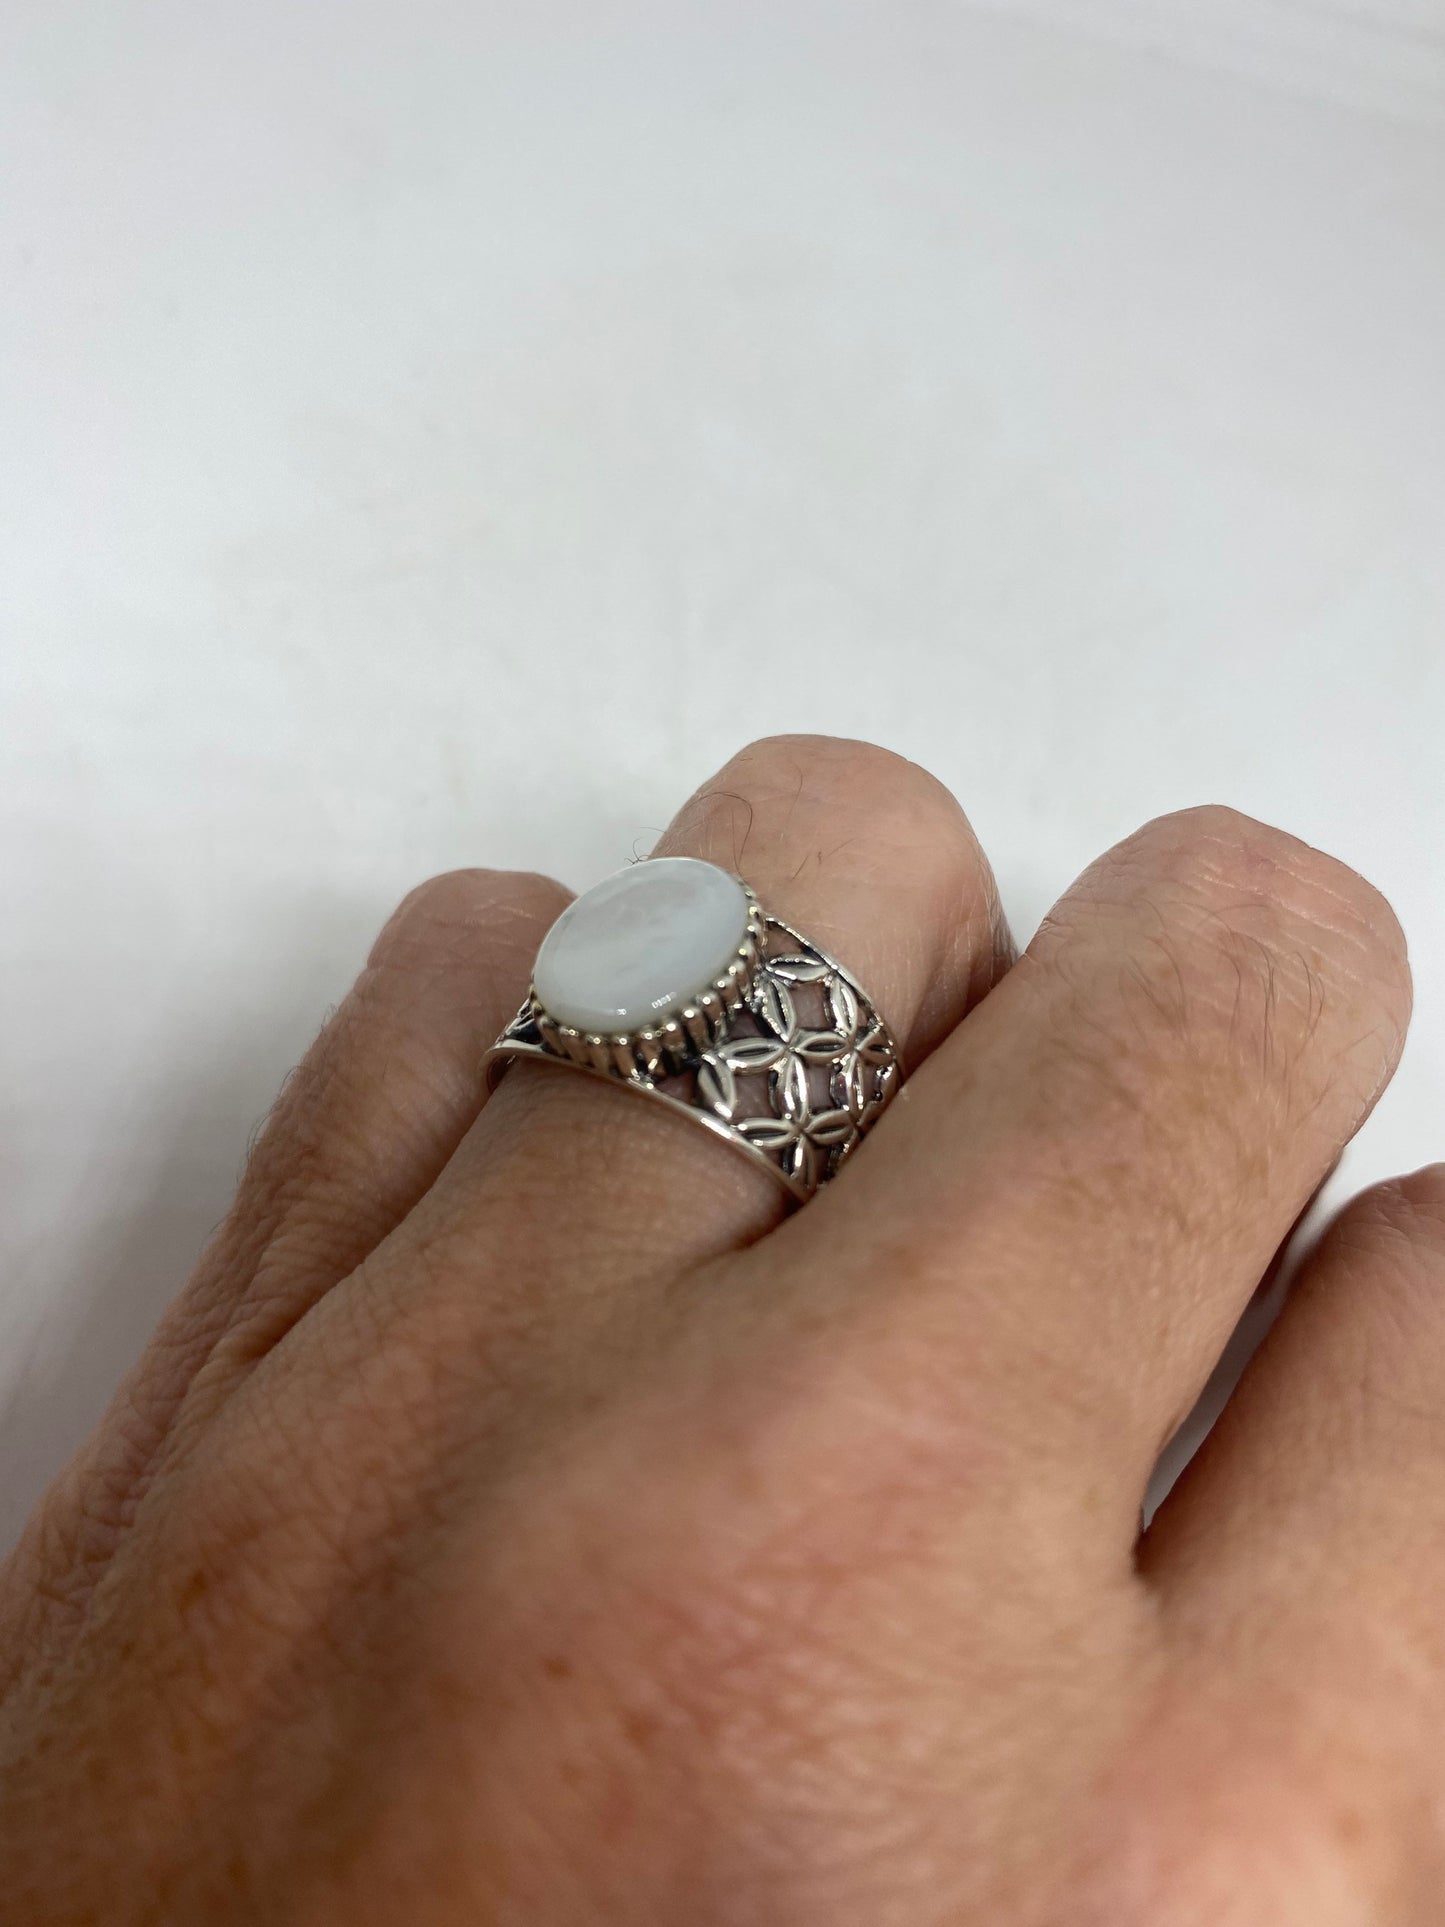 Antique White Mother of Pearl Filigree Sterling Silver Ring